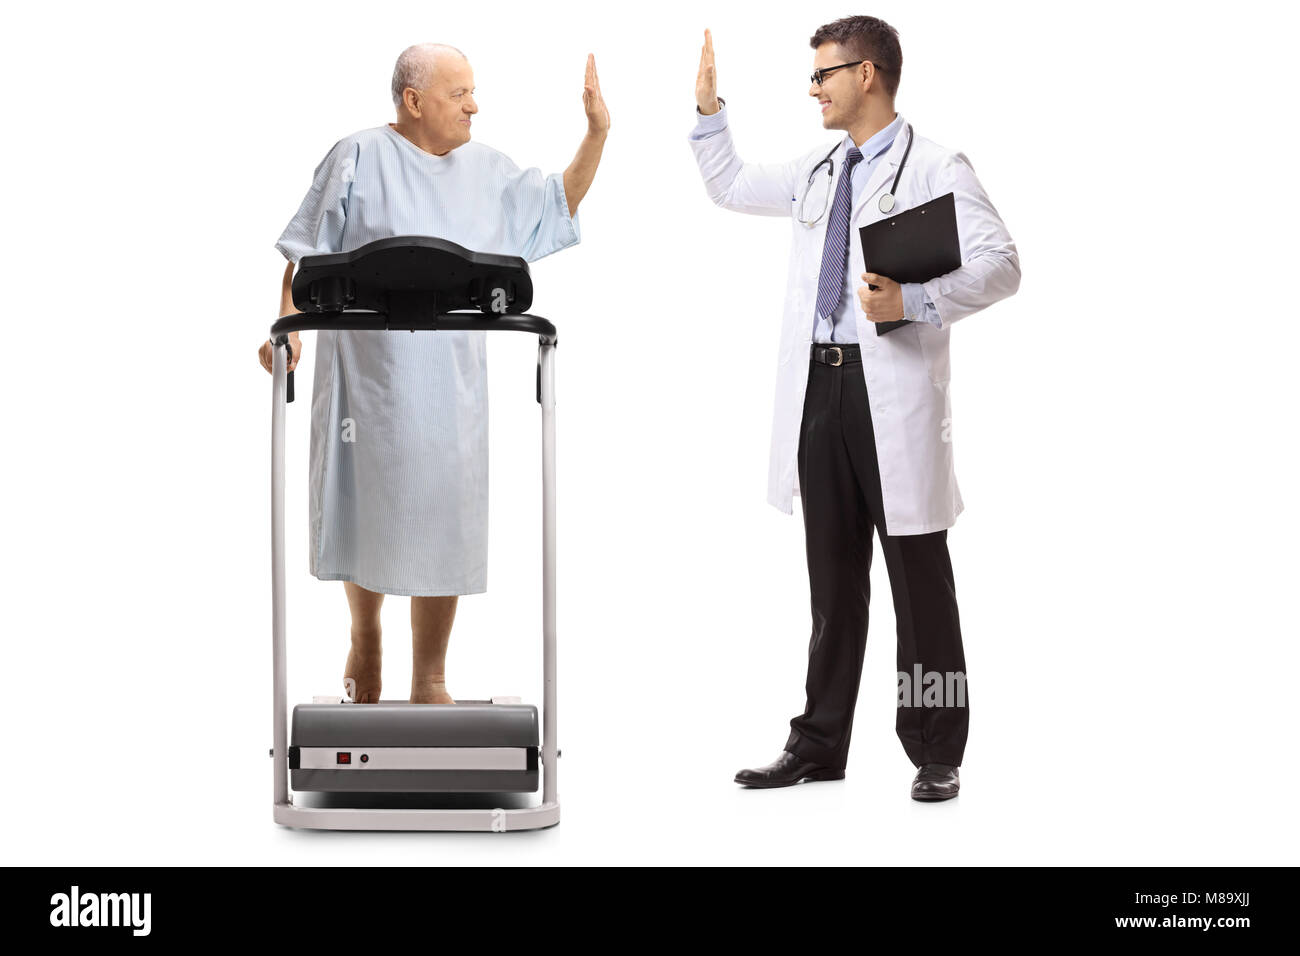 Full length profile shot of an elderly patient walking on a treadmill and high-fiving a doctor isolated on white background Stock Photo